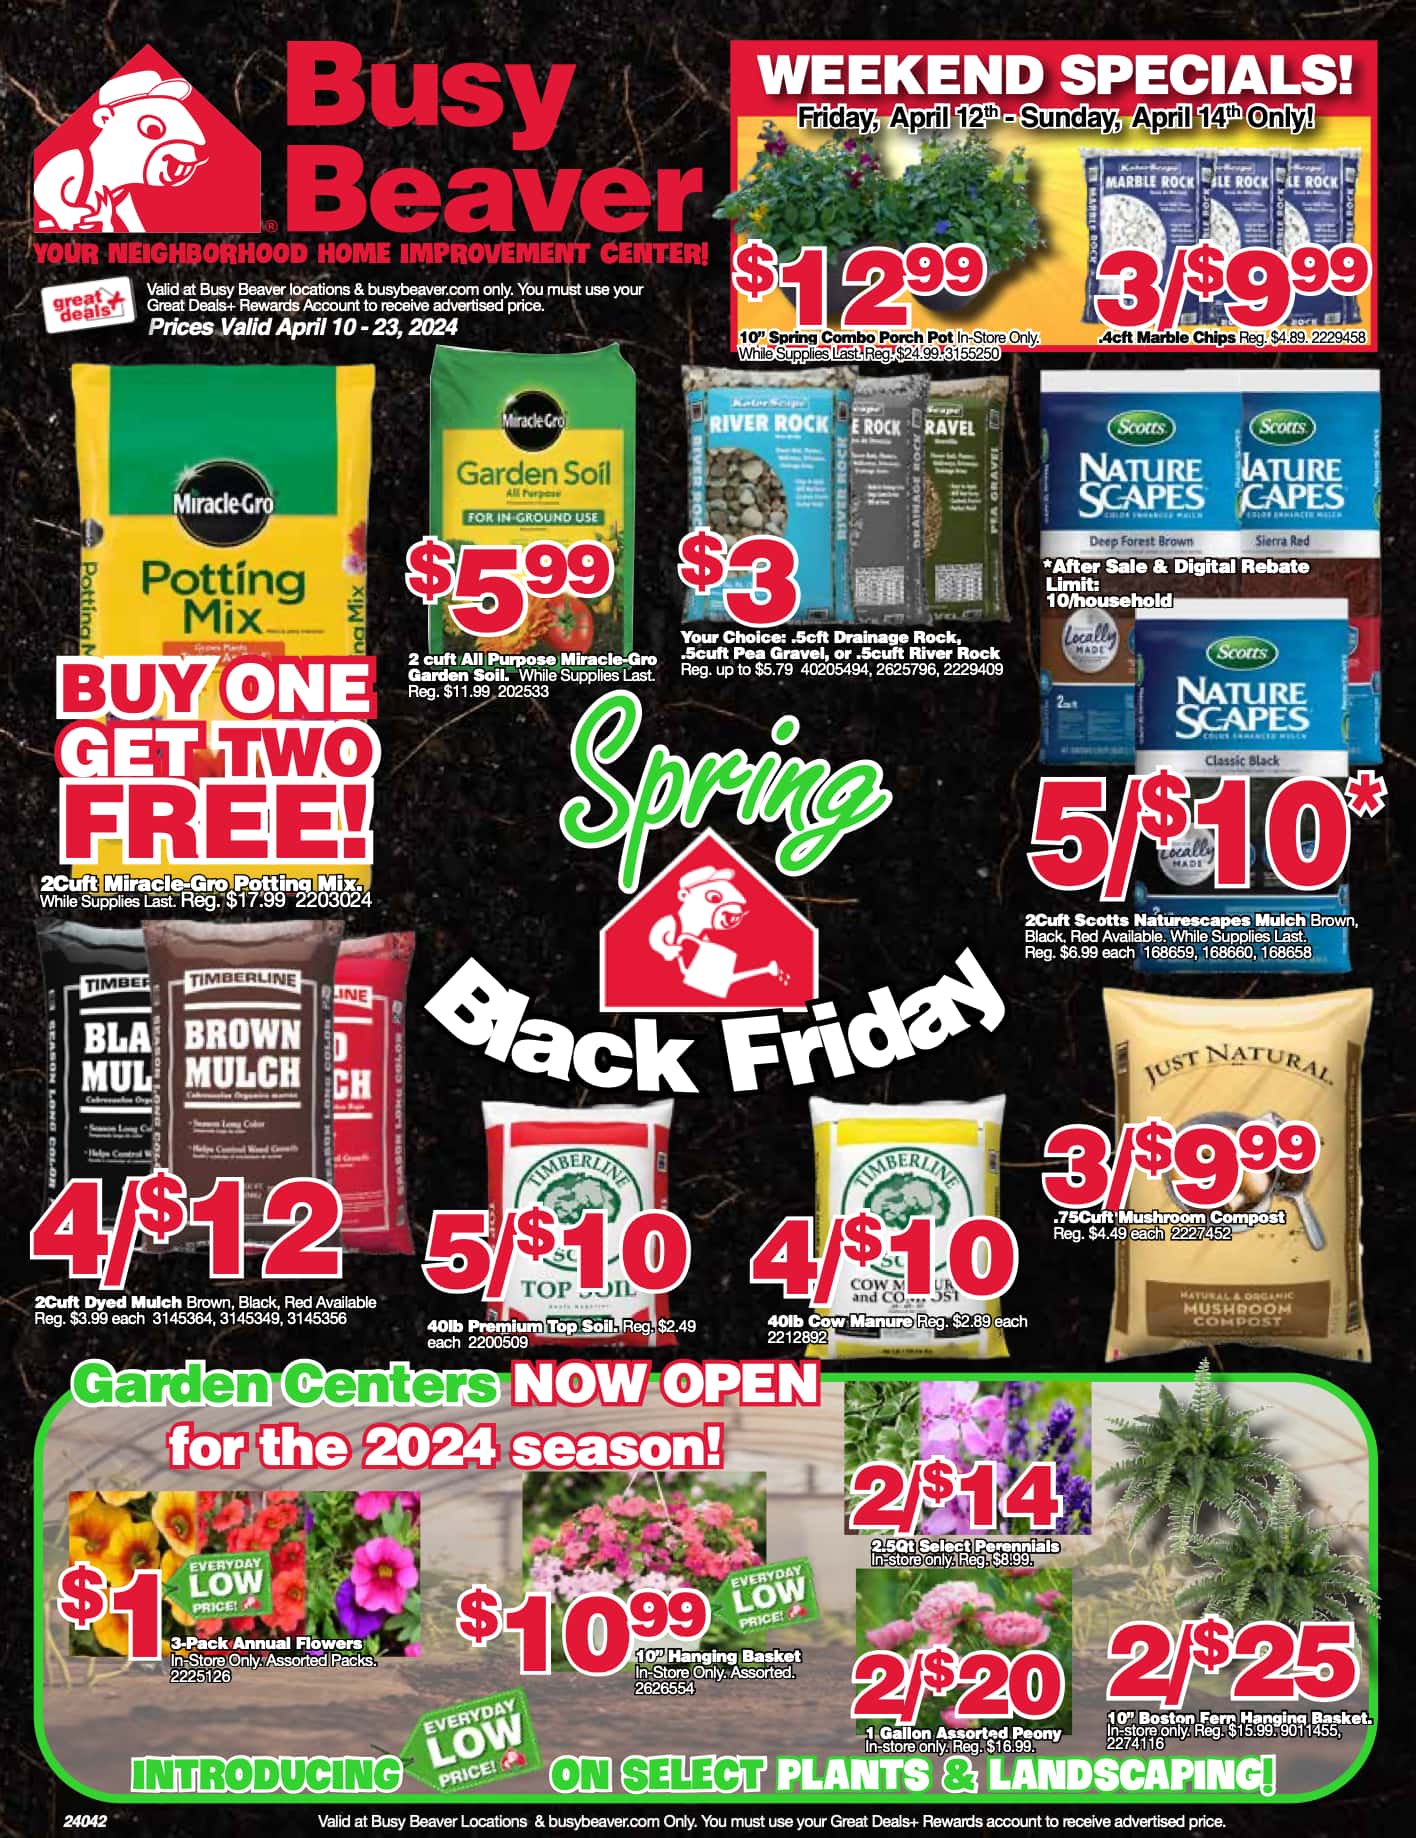 Busy Beaver weekly ad preview